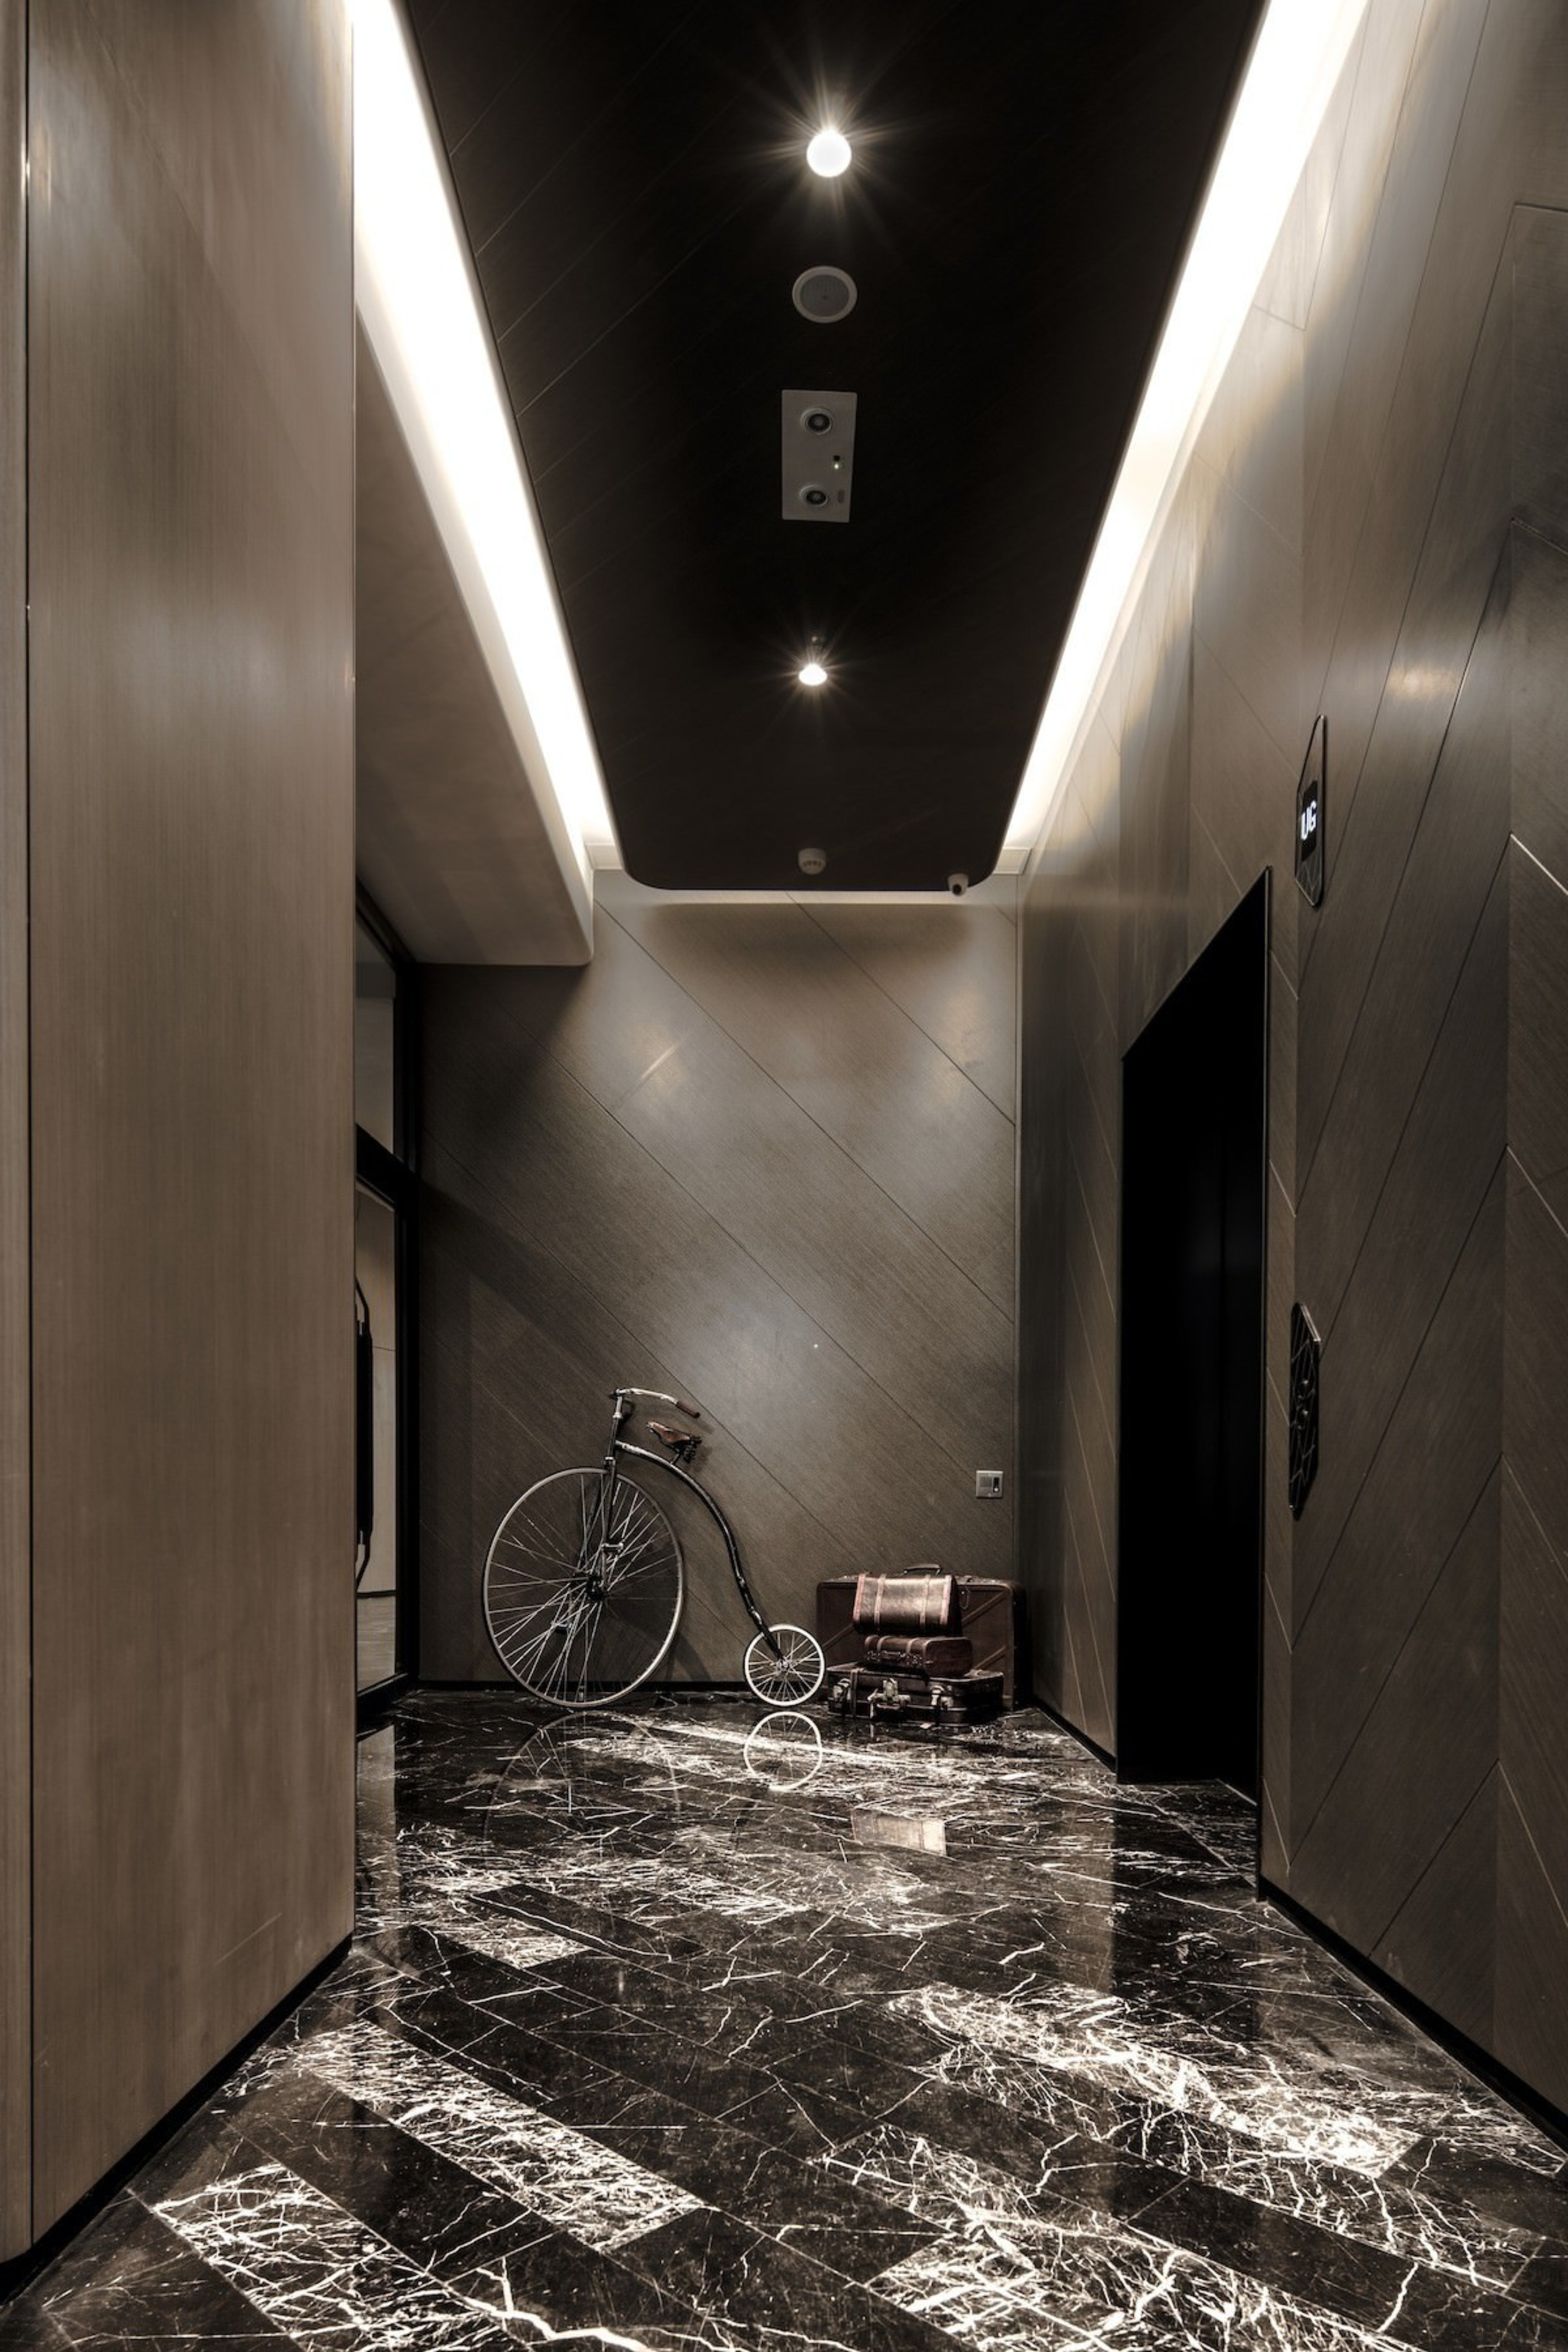 Hotel Ease - architecture | ceiling | daylighting architecture, ceiling, daylighting, floor, flooring, interior design, light, lighting, lobby, wall, black